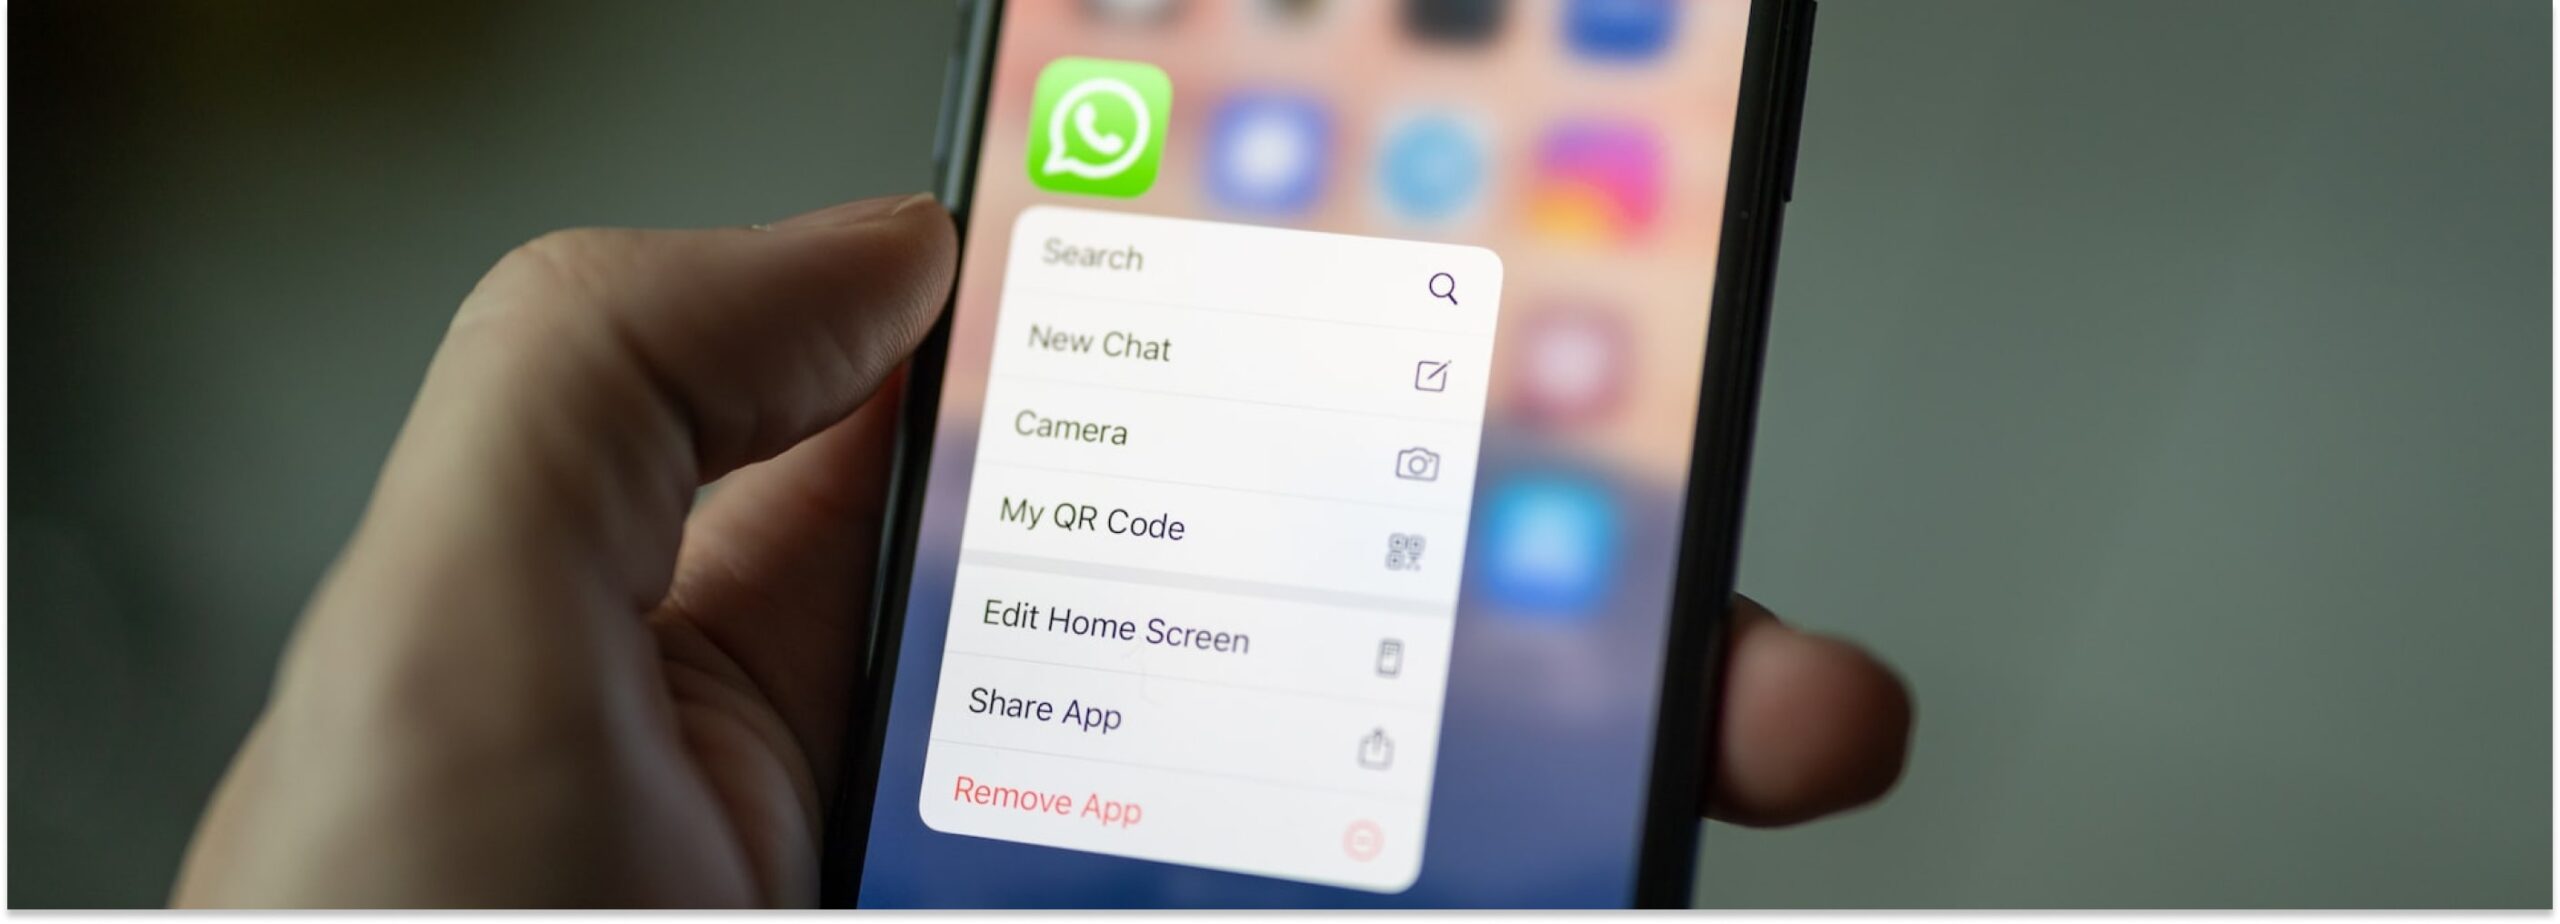 WhatsApp May Allow User to Save Disappearing messages